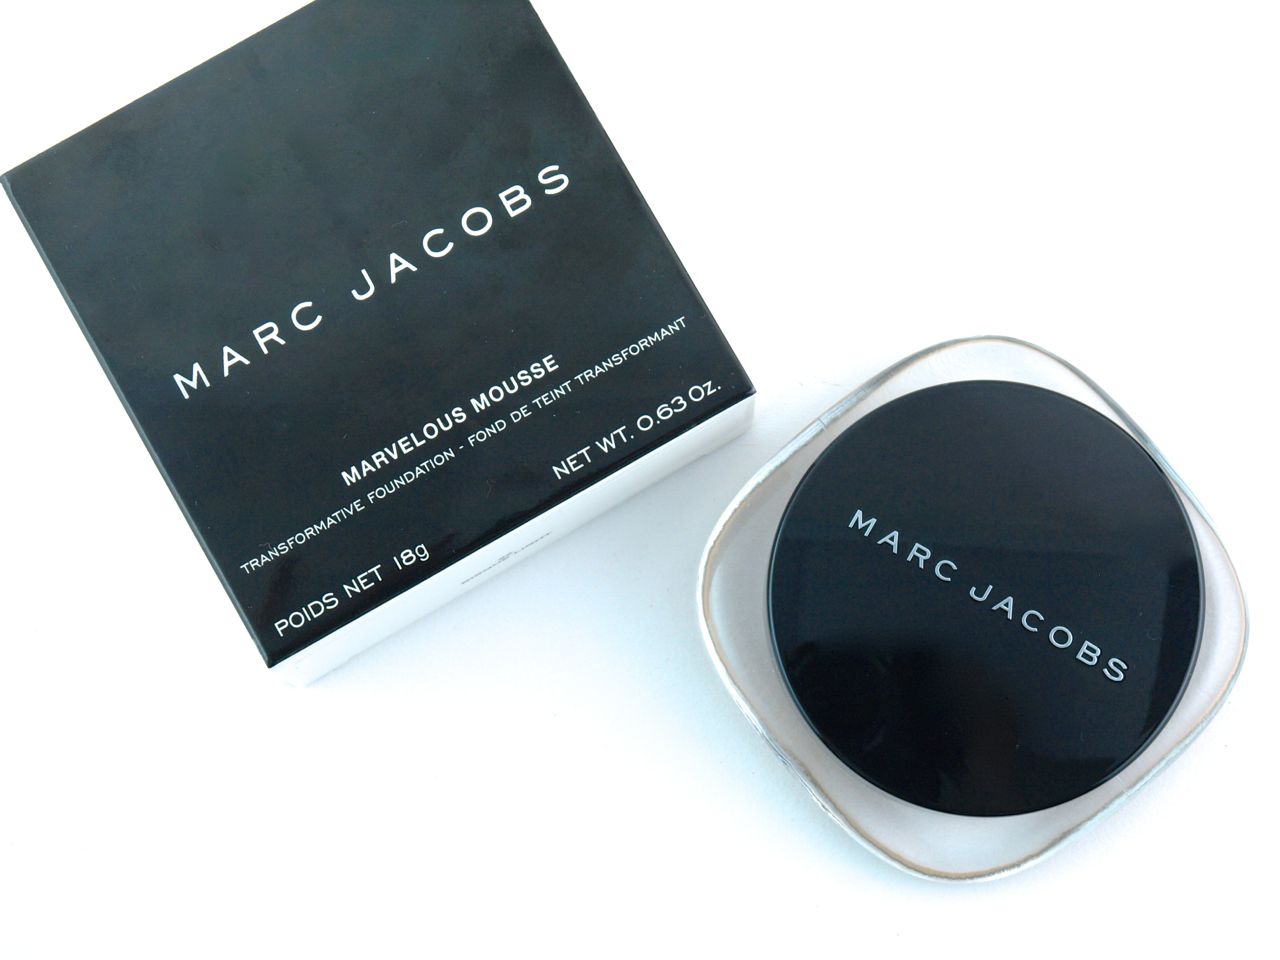 Marc Jacobs Marvelous Mousse Transformative Foundation in "22 Bisque Light": Review and Swatches